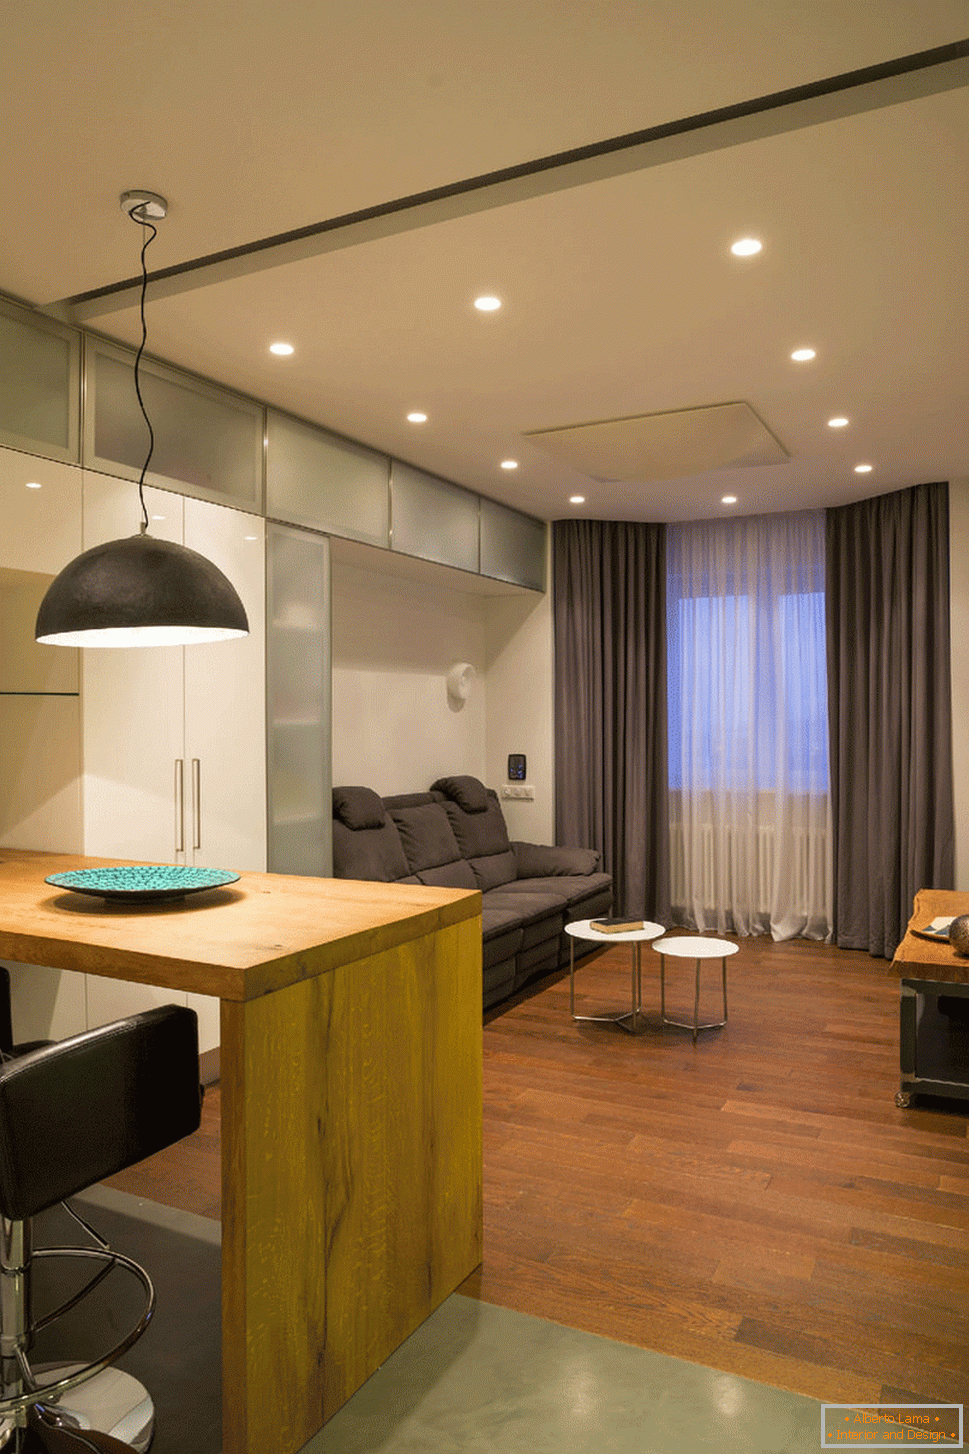 Illumination in an apartment with controlled lighting